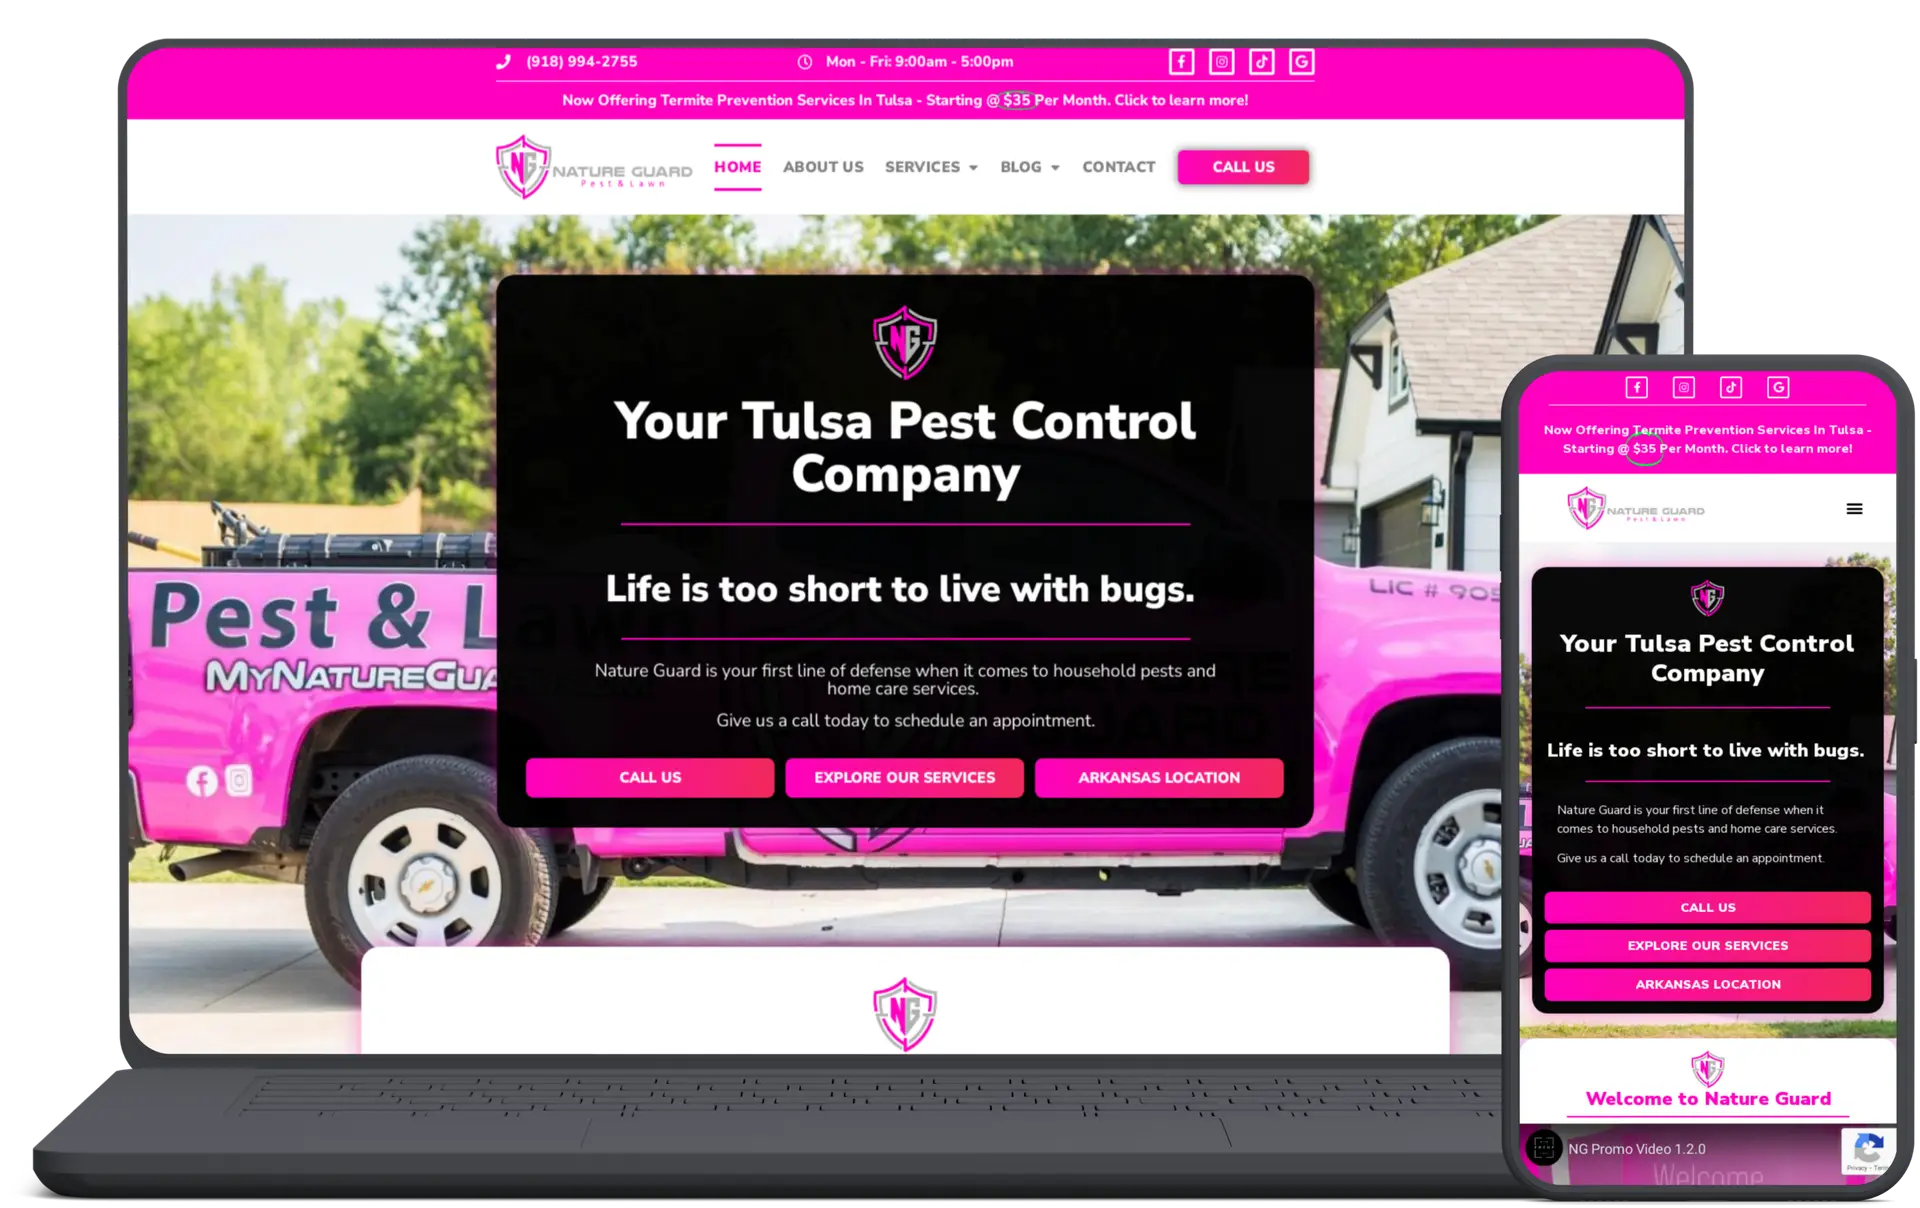 Mockup of the website for Nature Guard - A national pest control company